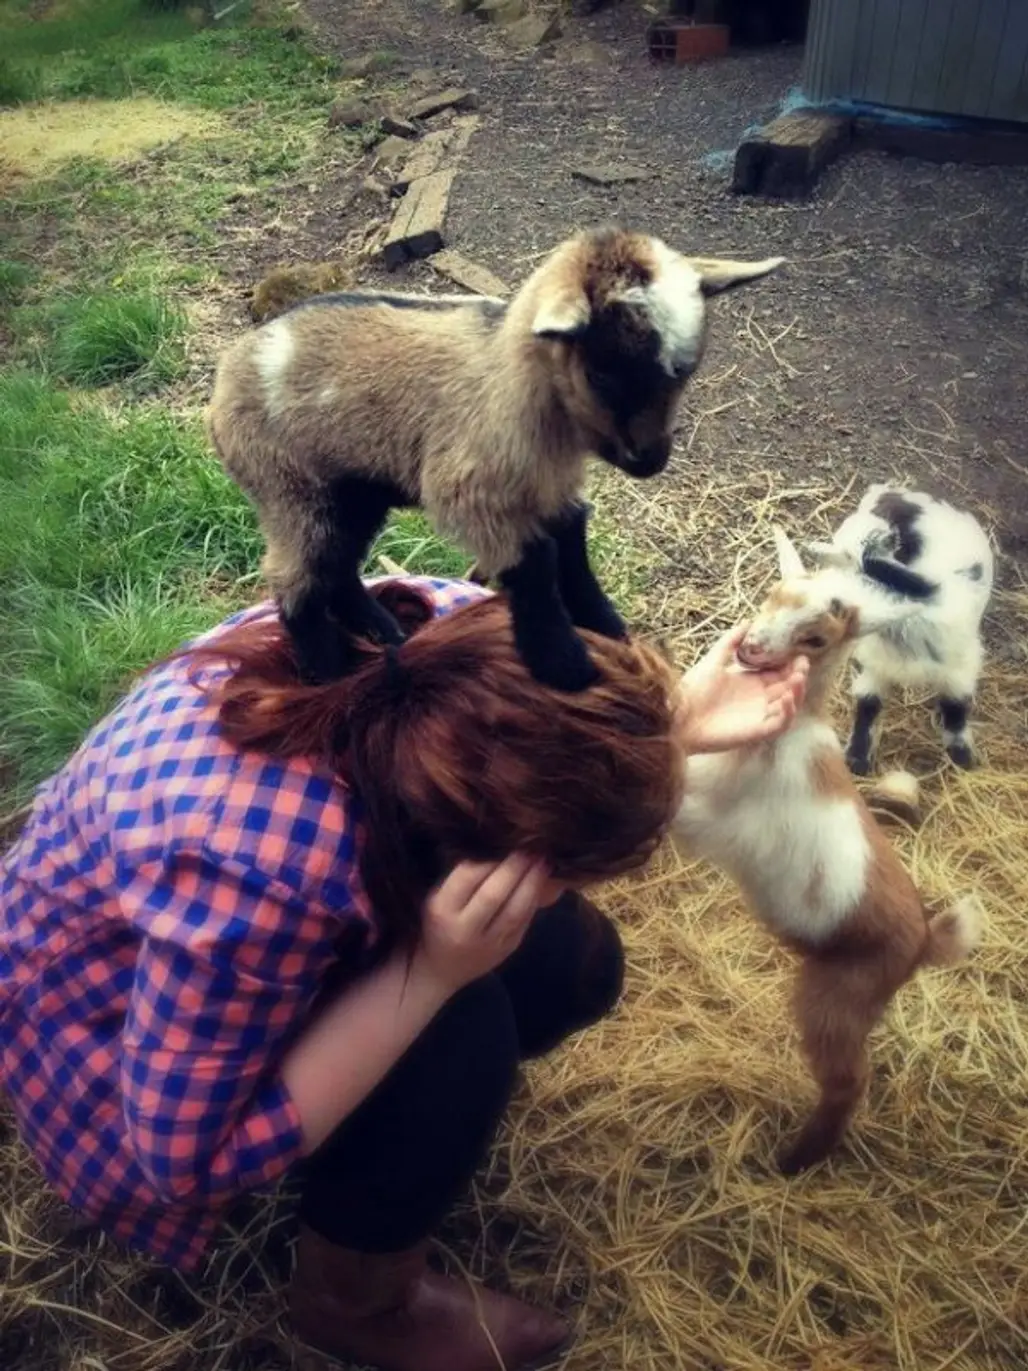 Attack of the Baby Goats